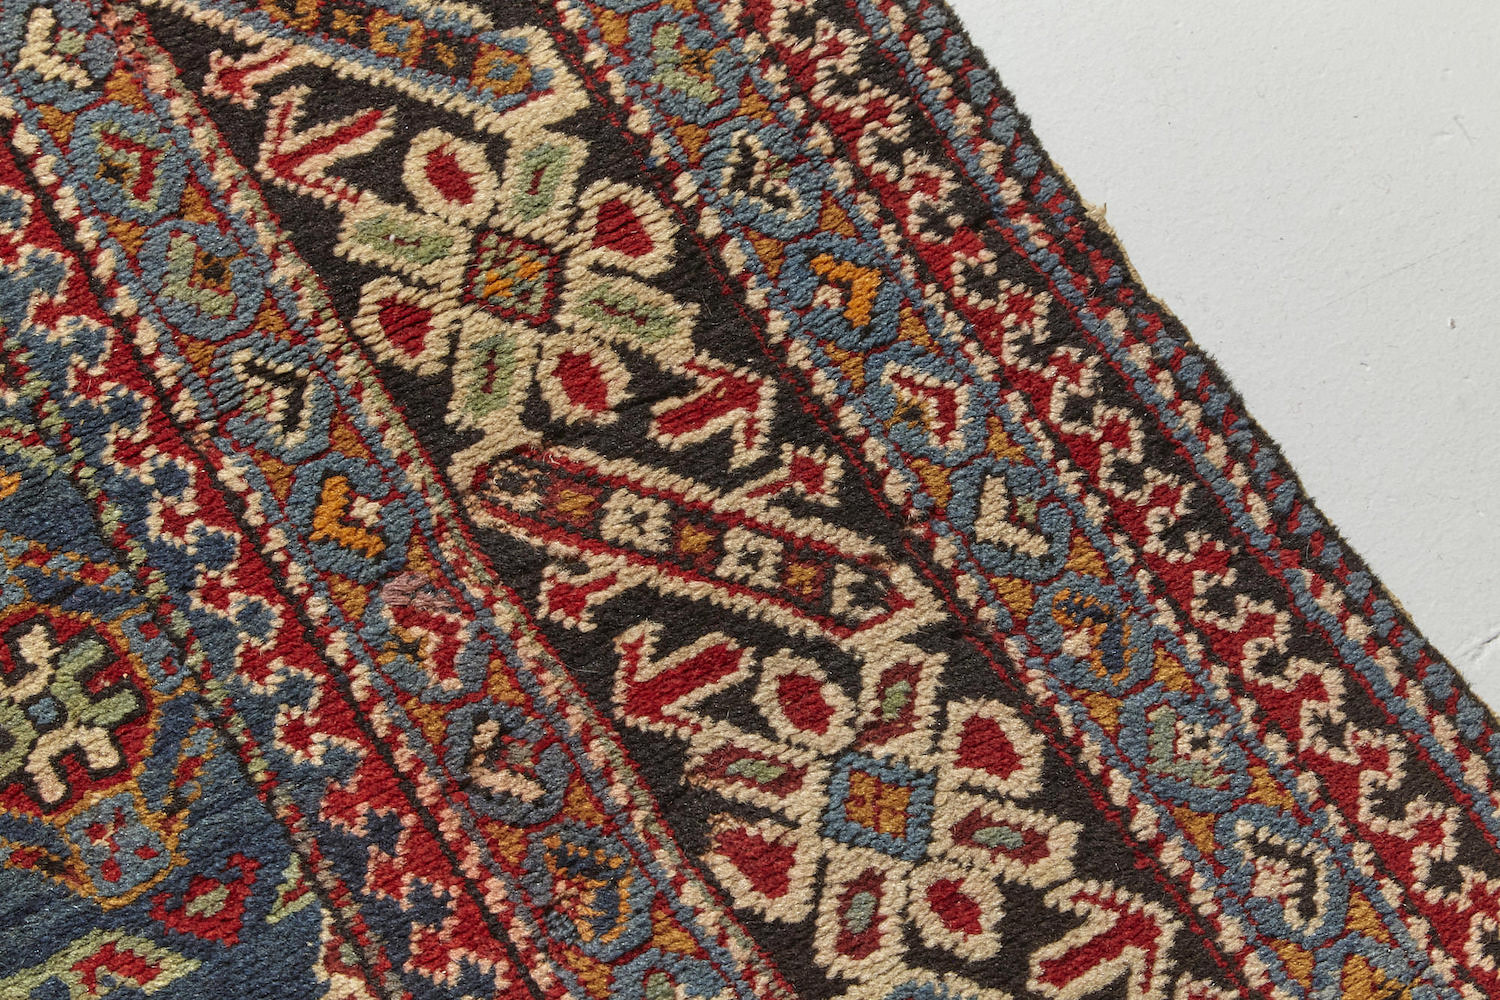 Border detail from Chi chi antique Persian Rug runner with blue, red and cream designs intricately hand woven throughout, perfect for a hallway, living room or study - Available from King Kennedy Rugs Los Angeles